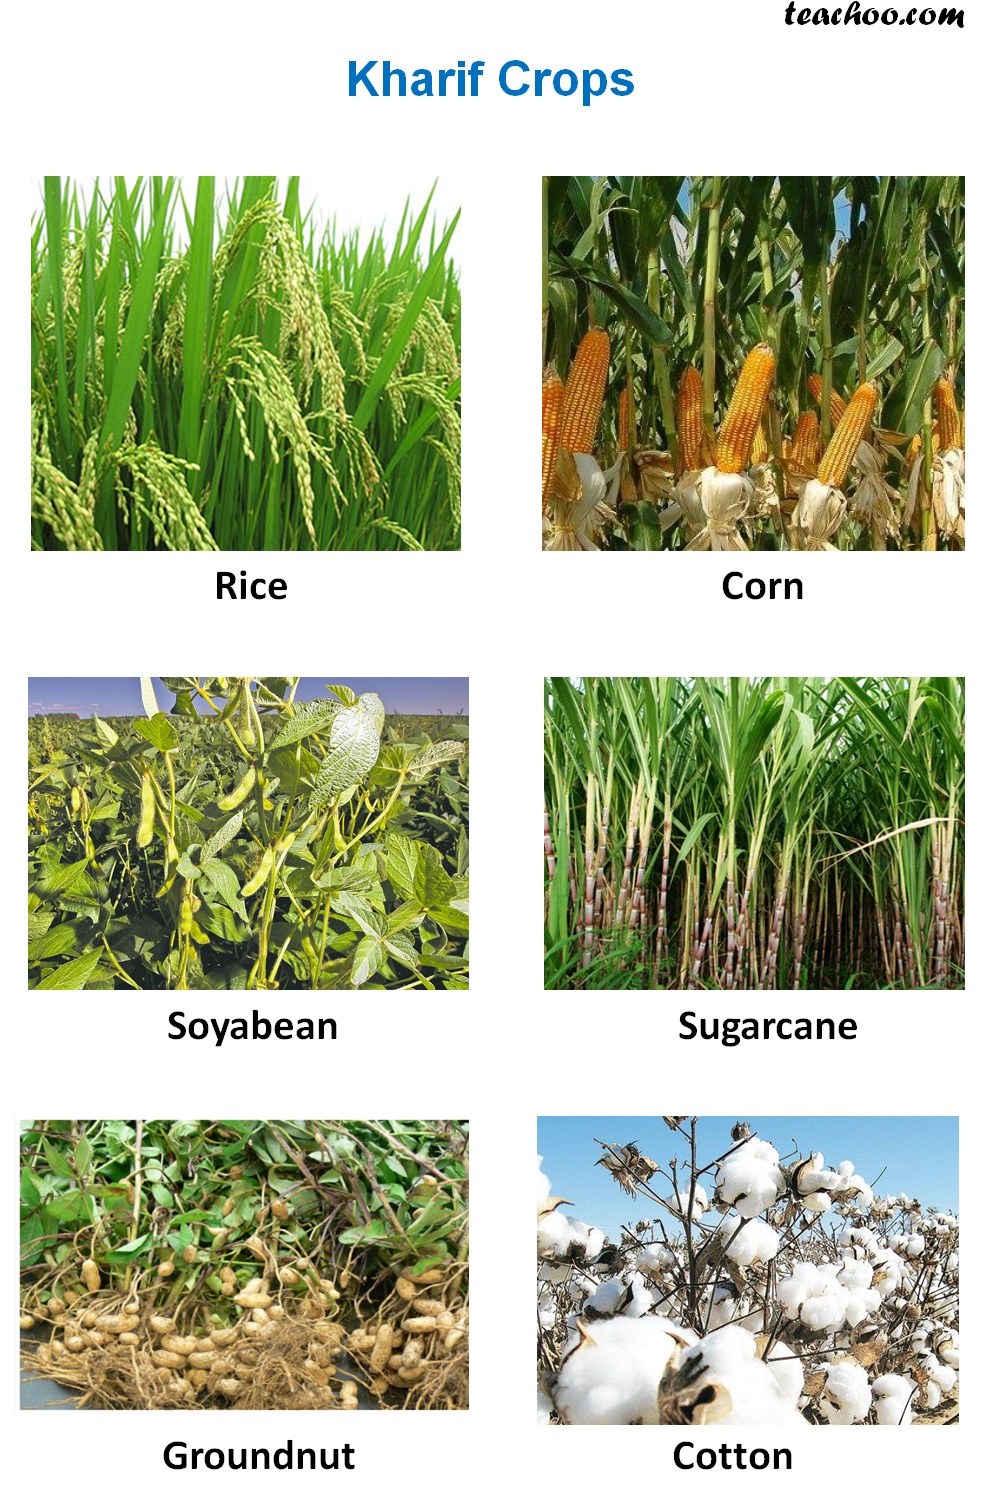 Rabi, Kharif and Zaid Crops - Explanation, Examples and Differences